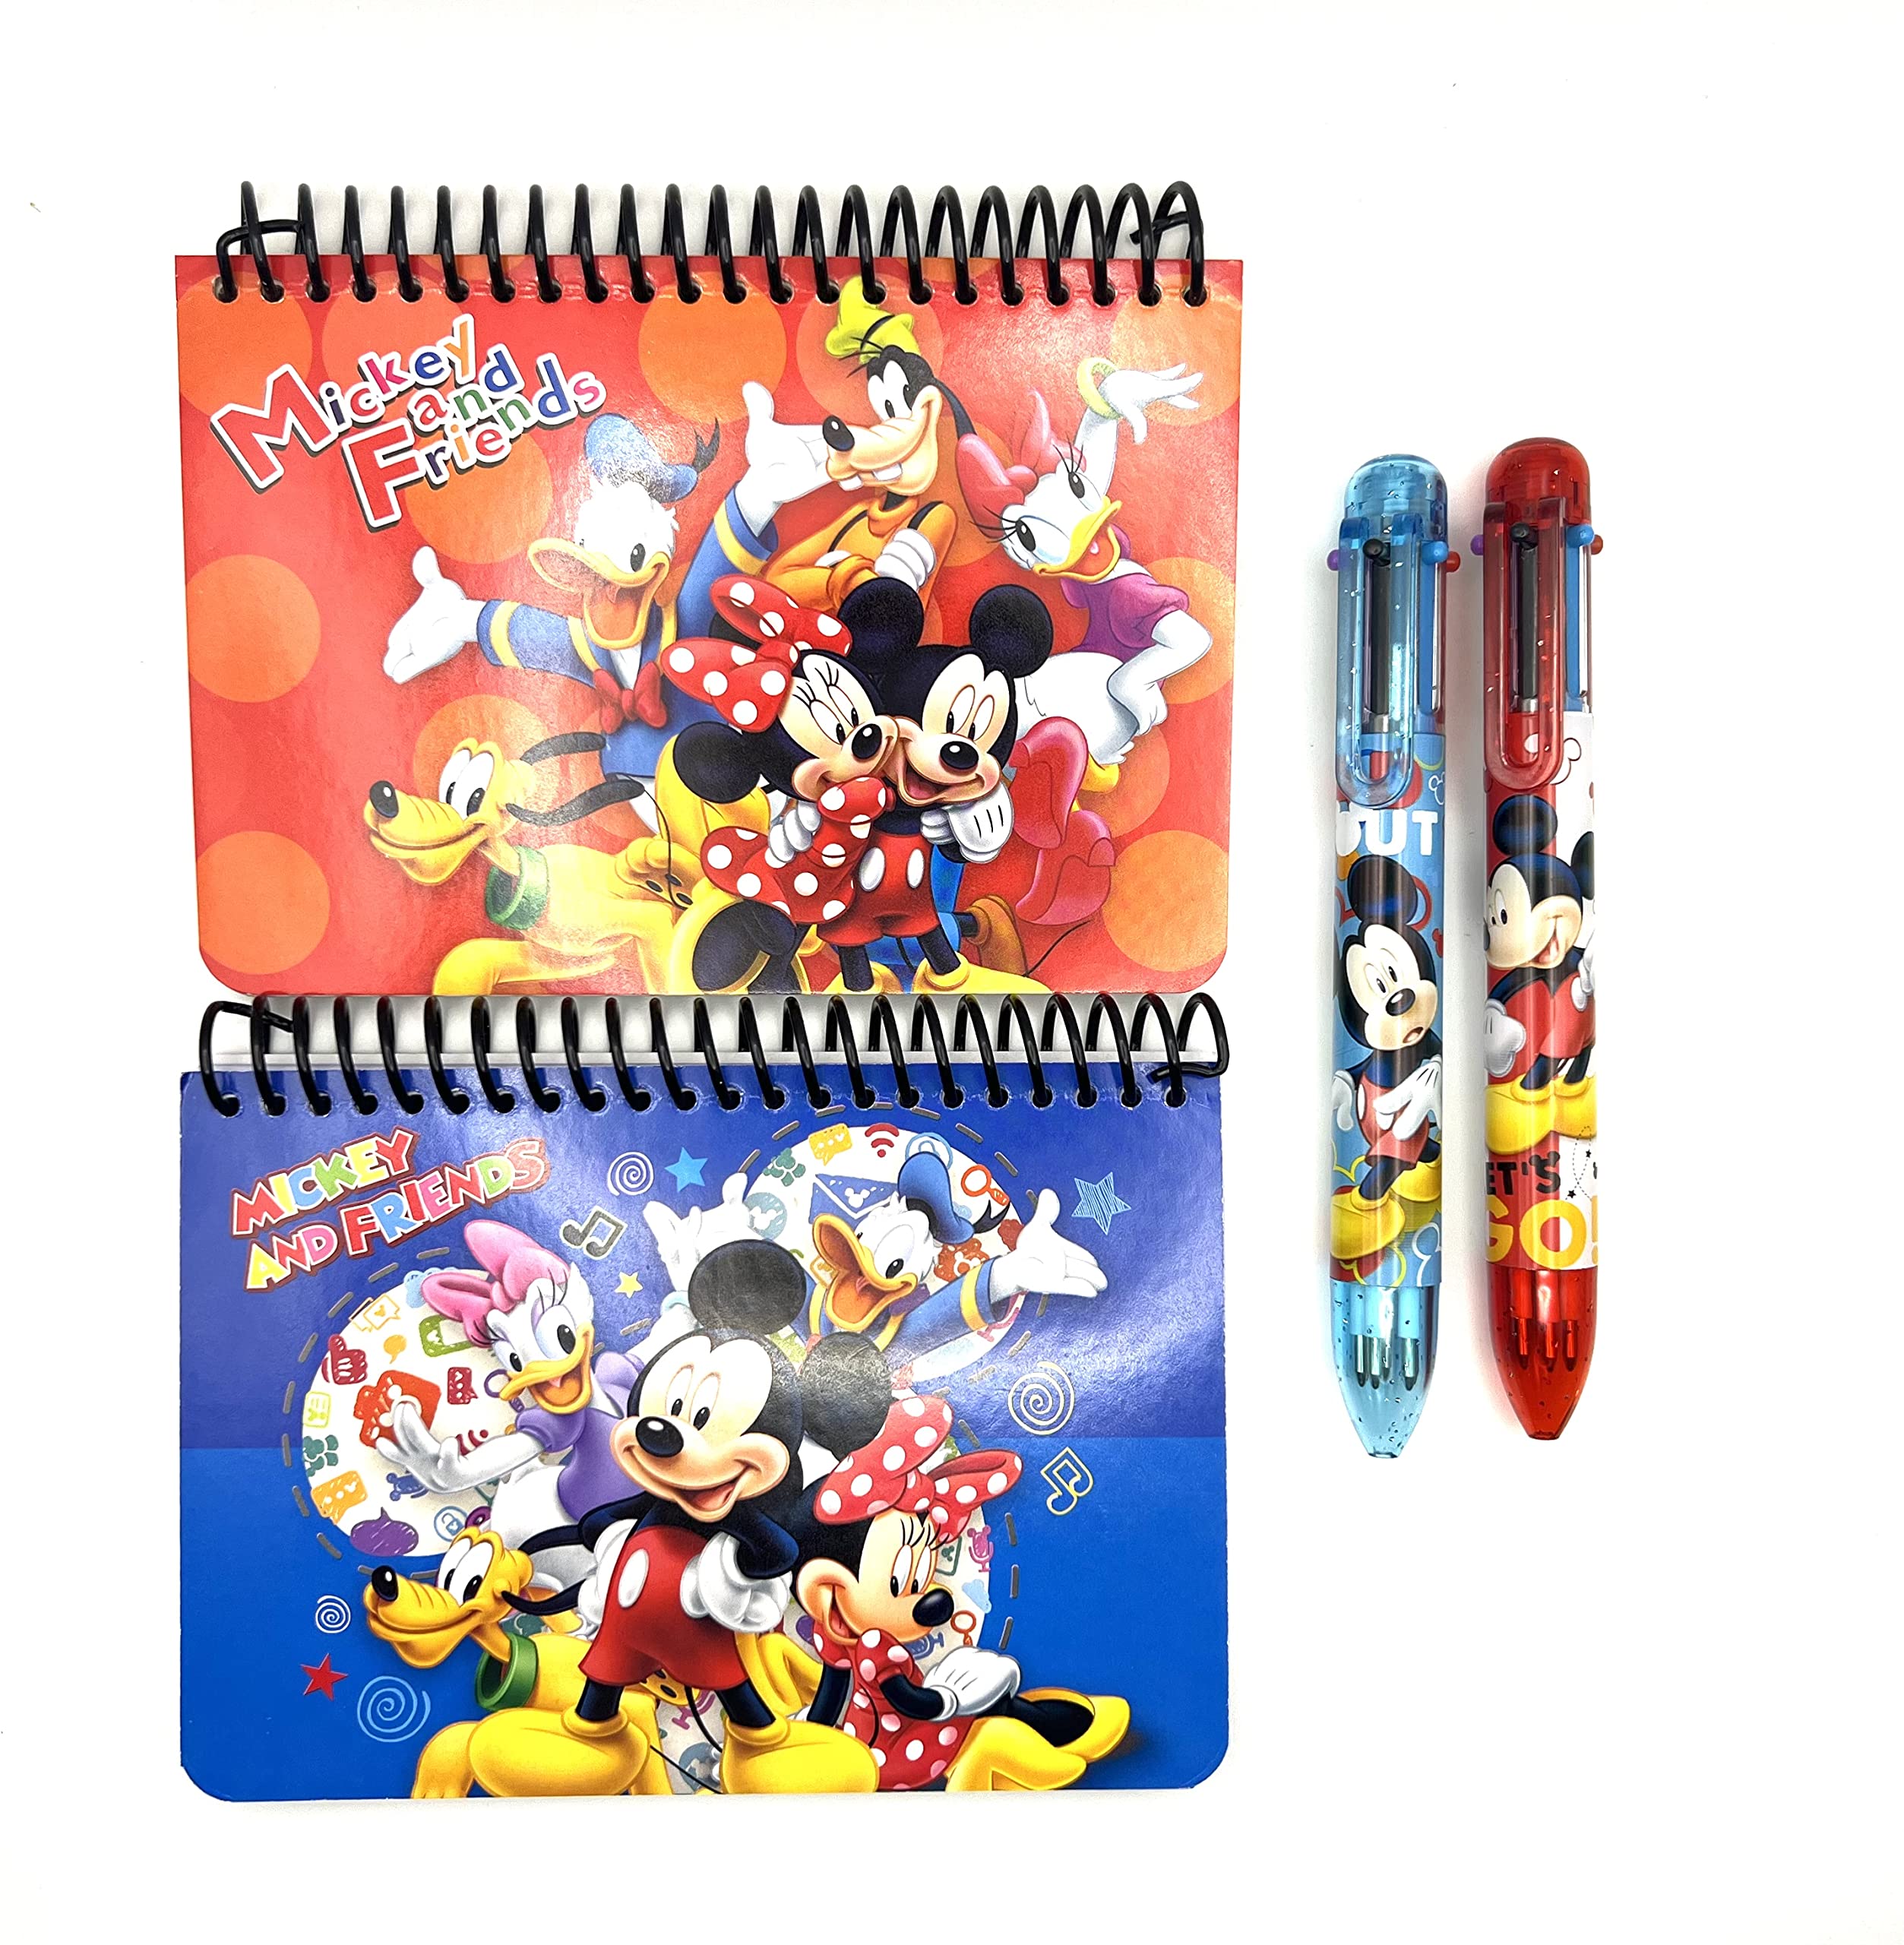 91C5dcarceL - Disney Autograph Book Mickey, Minnie, Mickey & Friends, Disney Princess with 6-in-1 Multicolor Pen 2-Pack (Blue/Red Mickey and Friends)